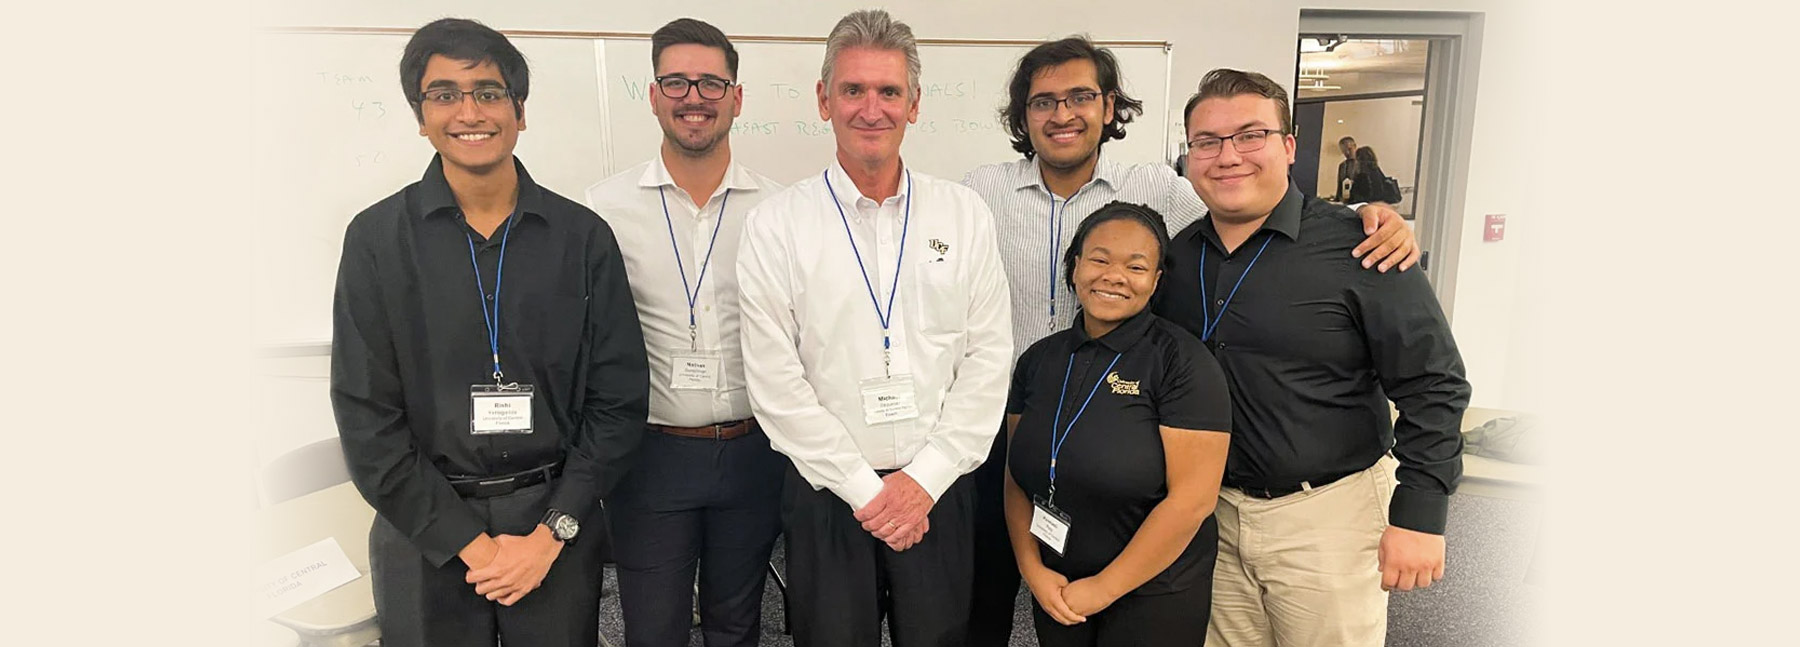 The UCF Ethics Bowl team poses with their coach, Professor Michael Strawser